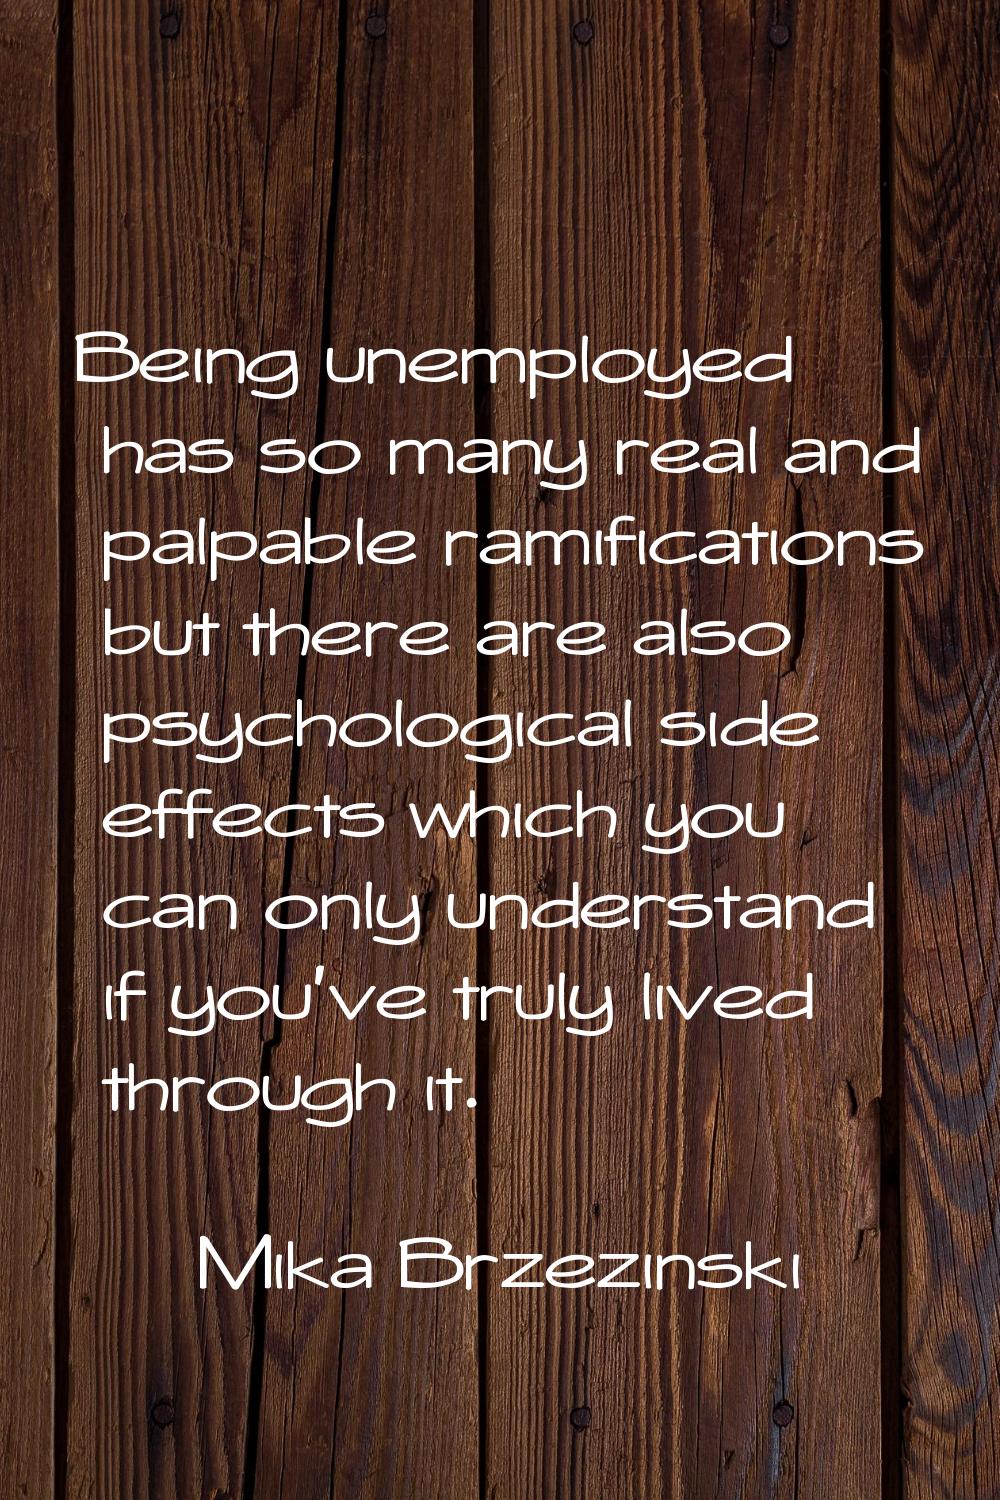 Being unemployed has so many real and palpable ramifications but there are also psychological side 